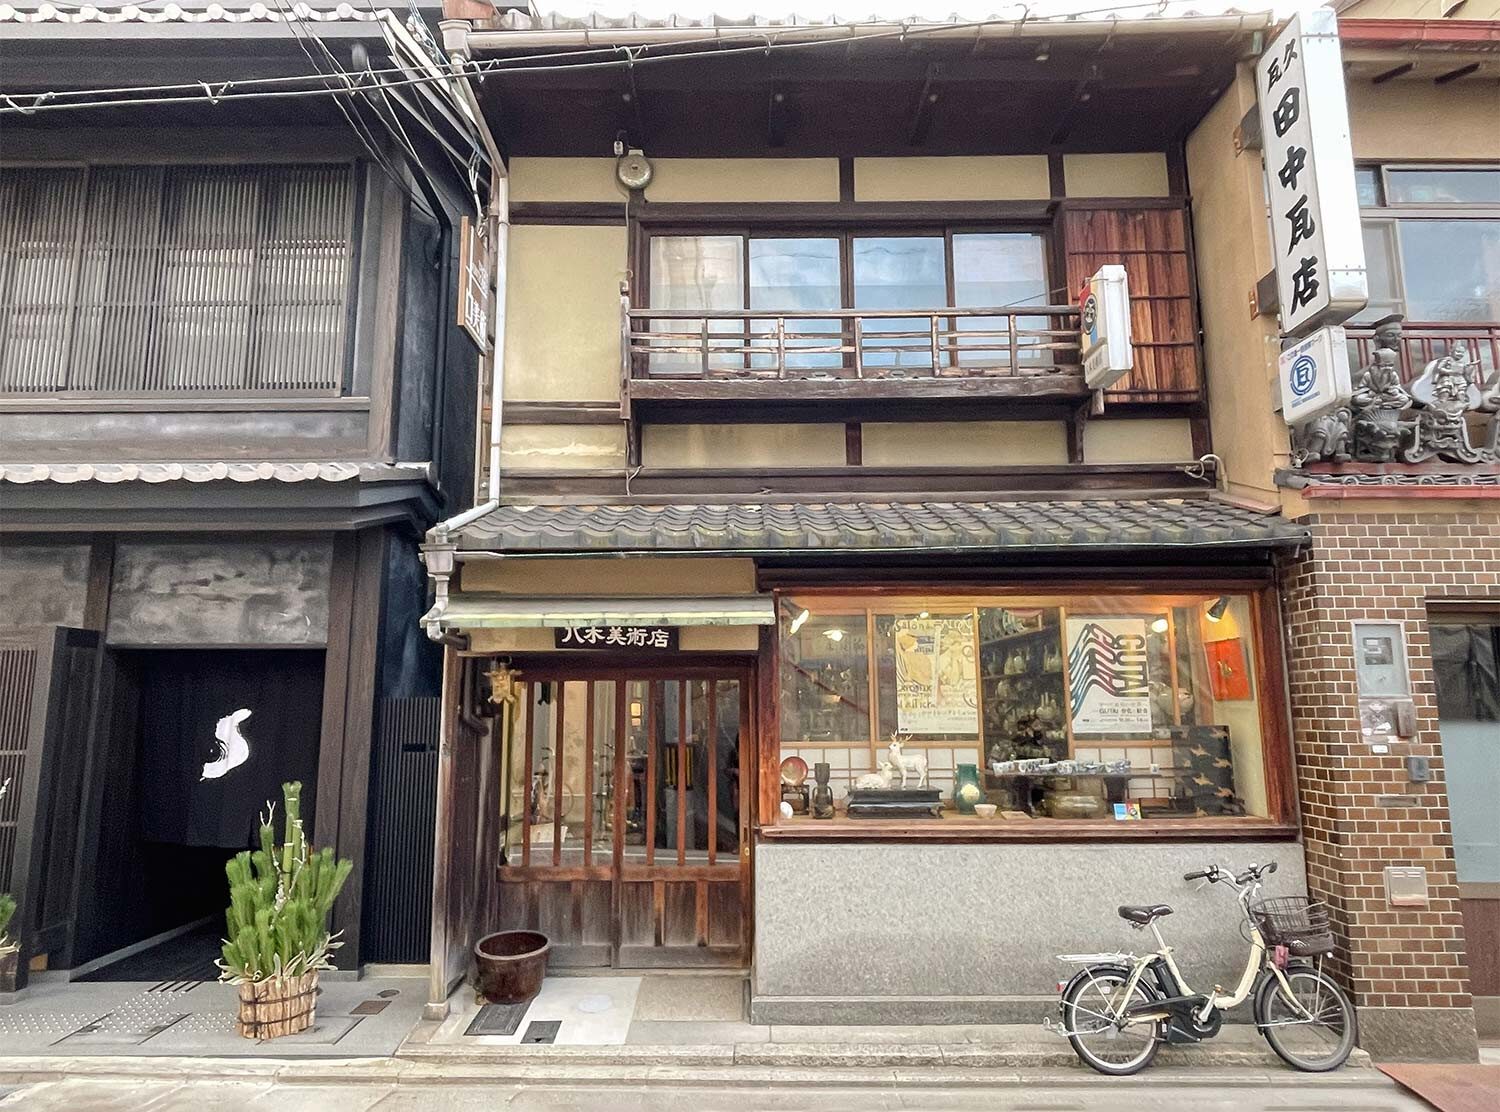 The Shinmonzen The hotel honors the machiya fabric of this neighborhood, sharing the street with a cherished multi-generational antique store